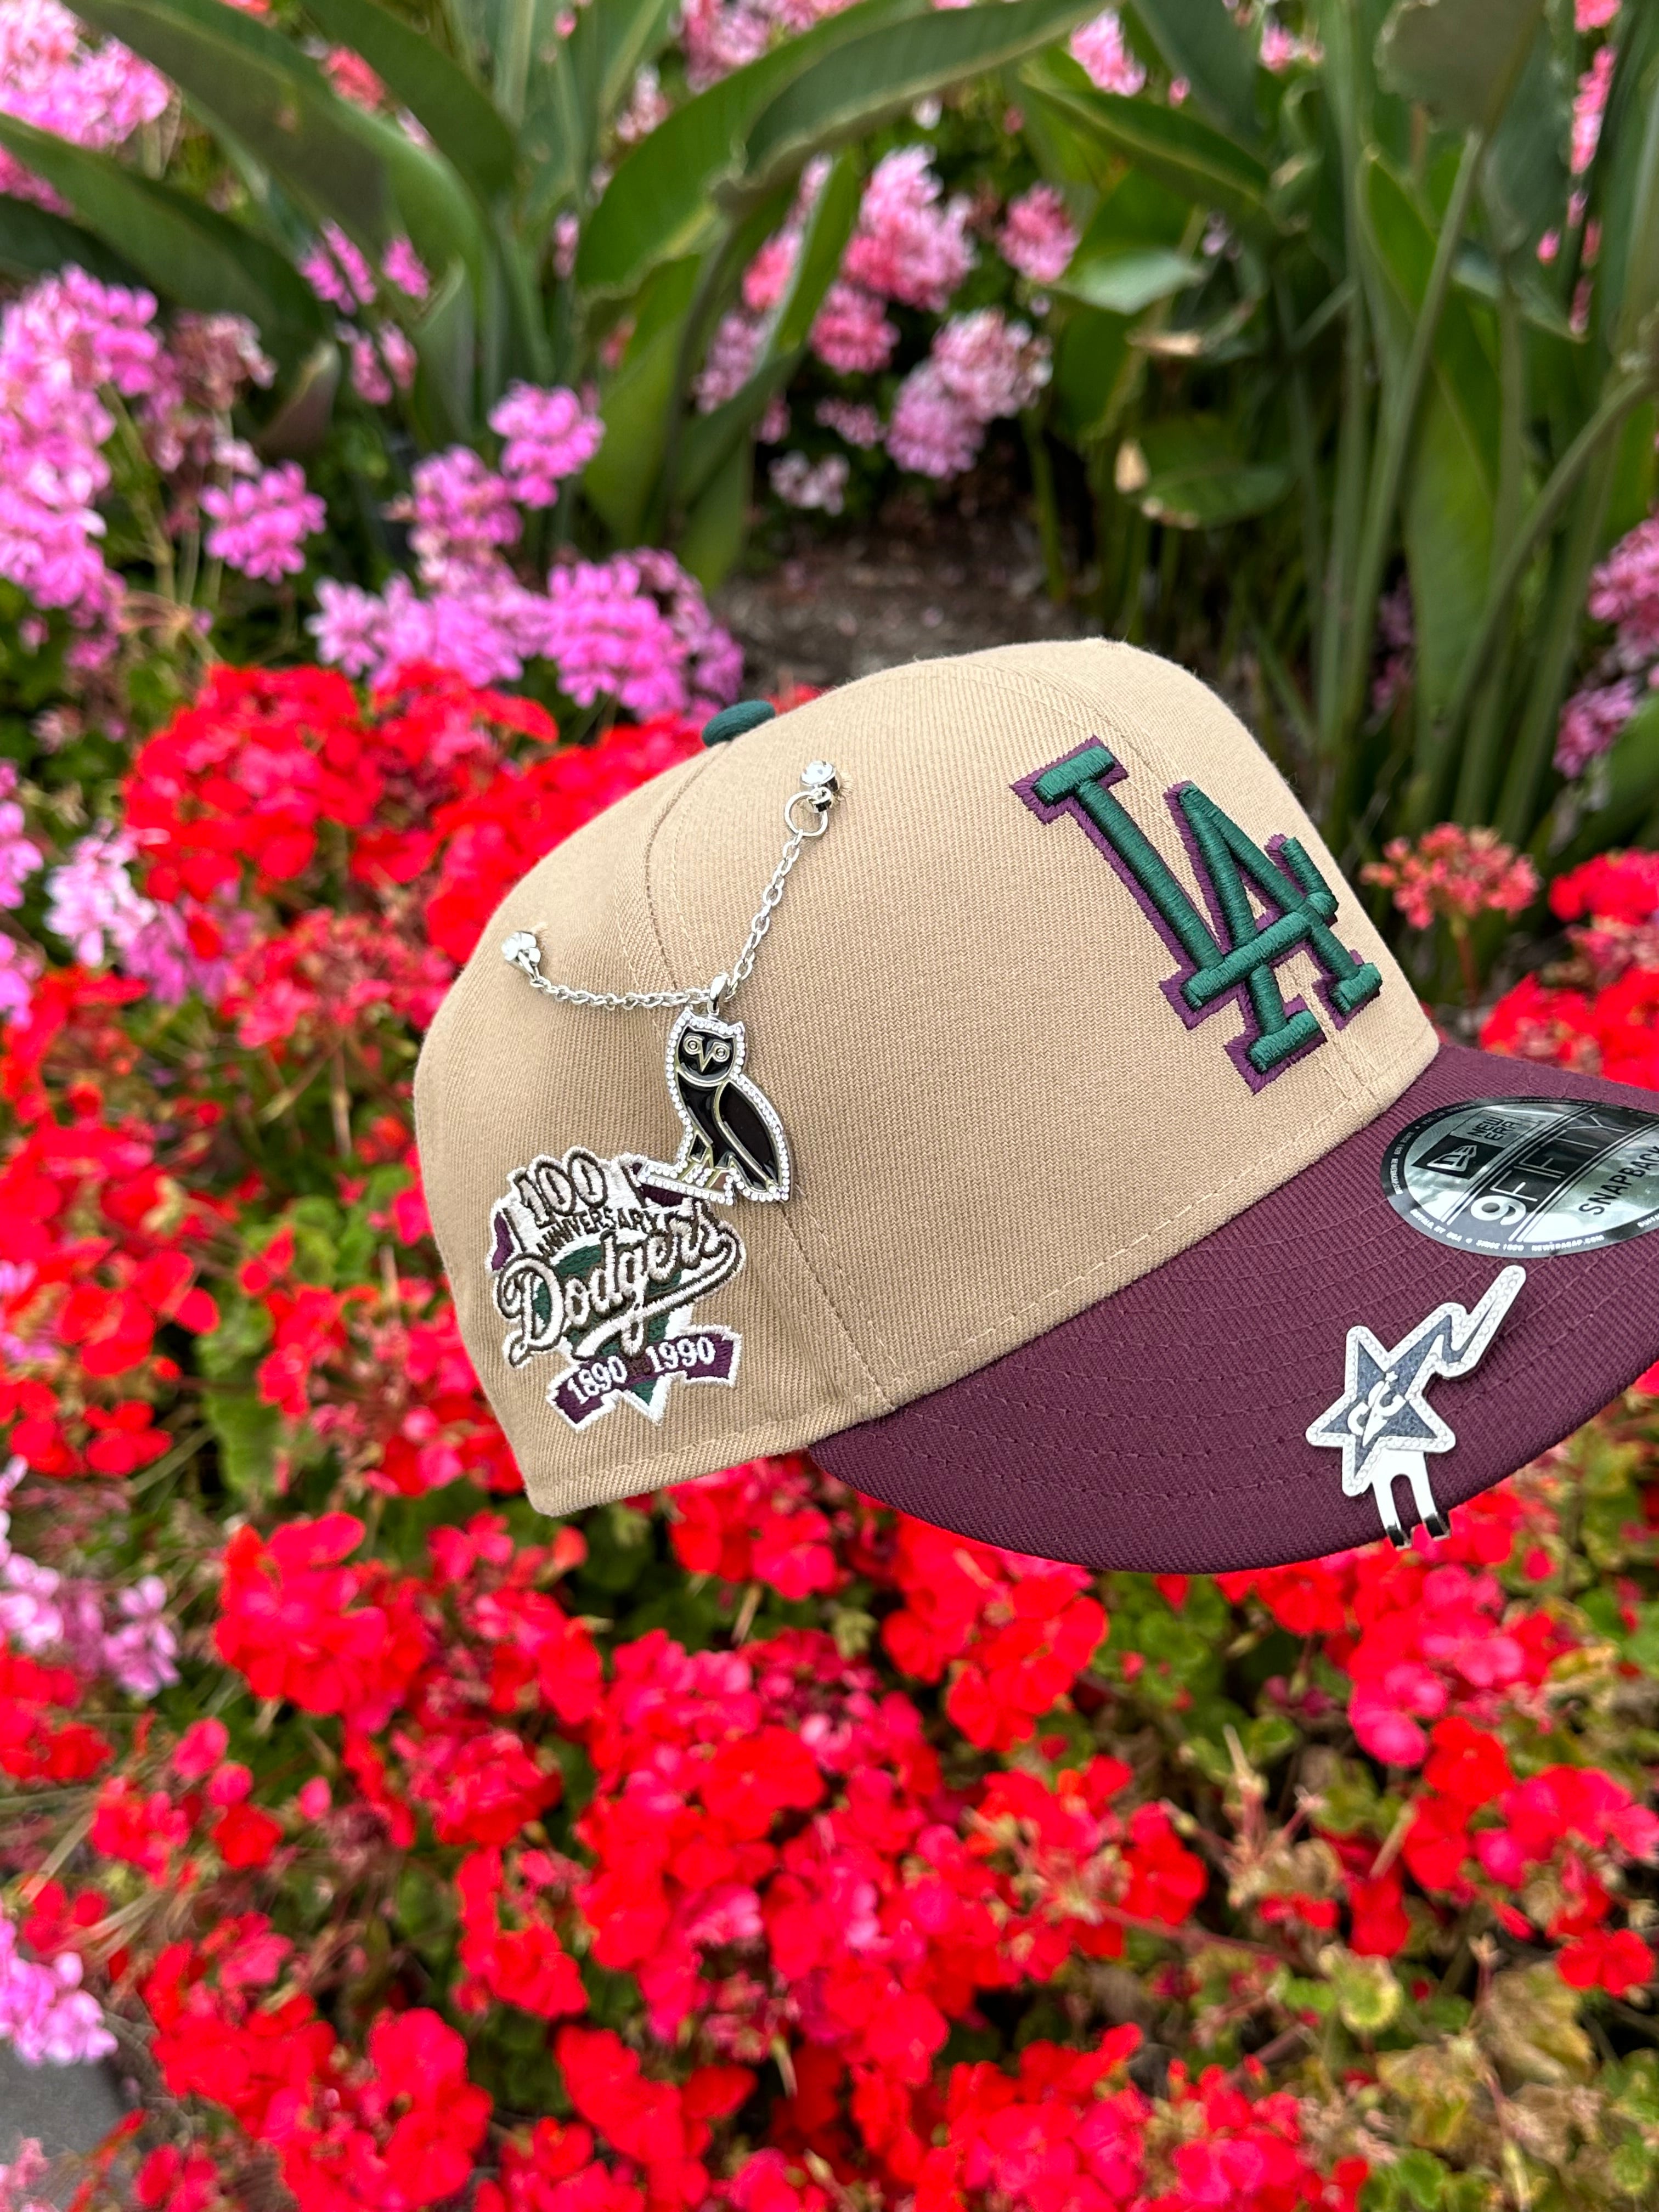 NEW ERA EXCLUSIVE 9FIFTY KHAKI/MAROON LOS ANGELES DODGERS SNAPBACK W/ 100TH ANNIVERSARY SIDE PATCH